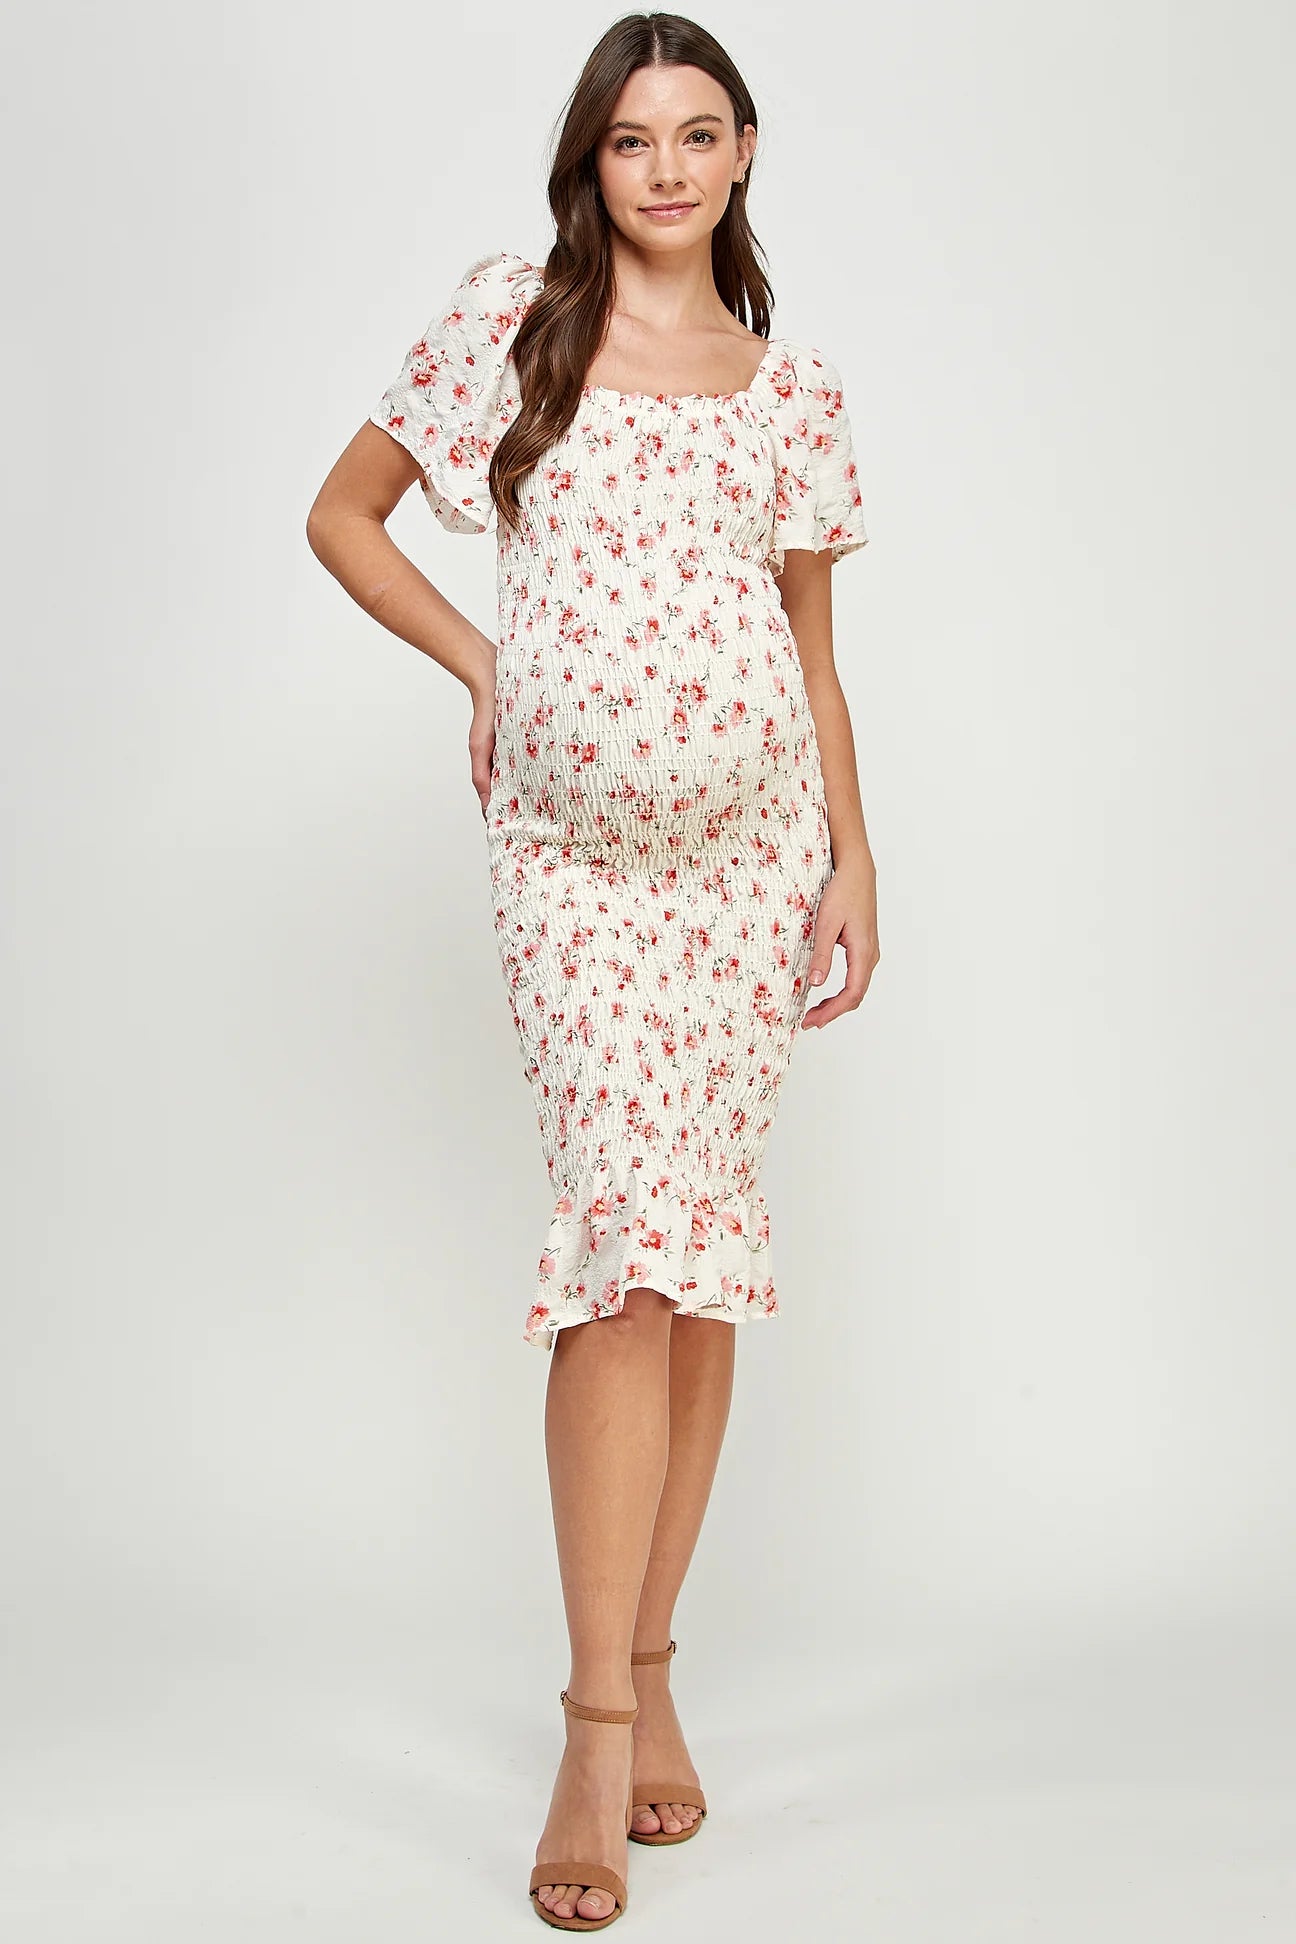 SHEIN Gathered Sleeve Button Front Floral Dress for Sale Australia